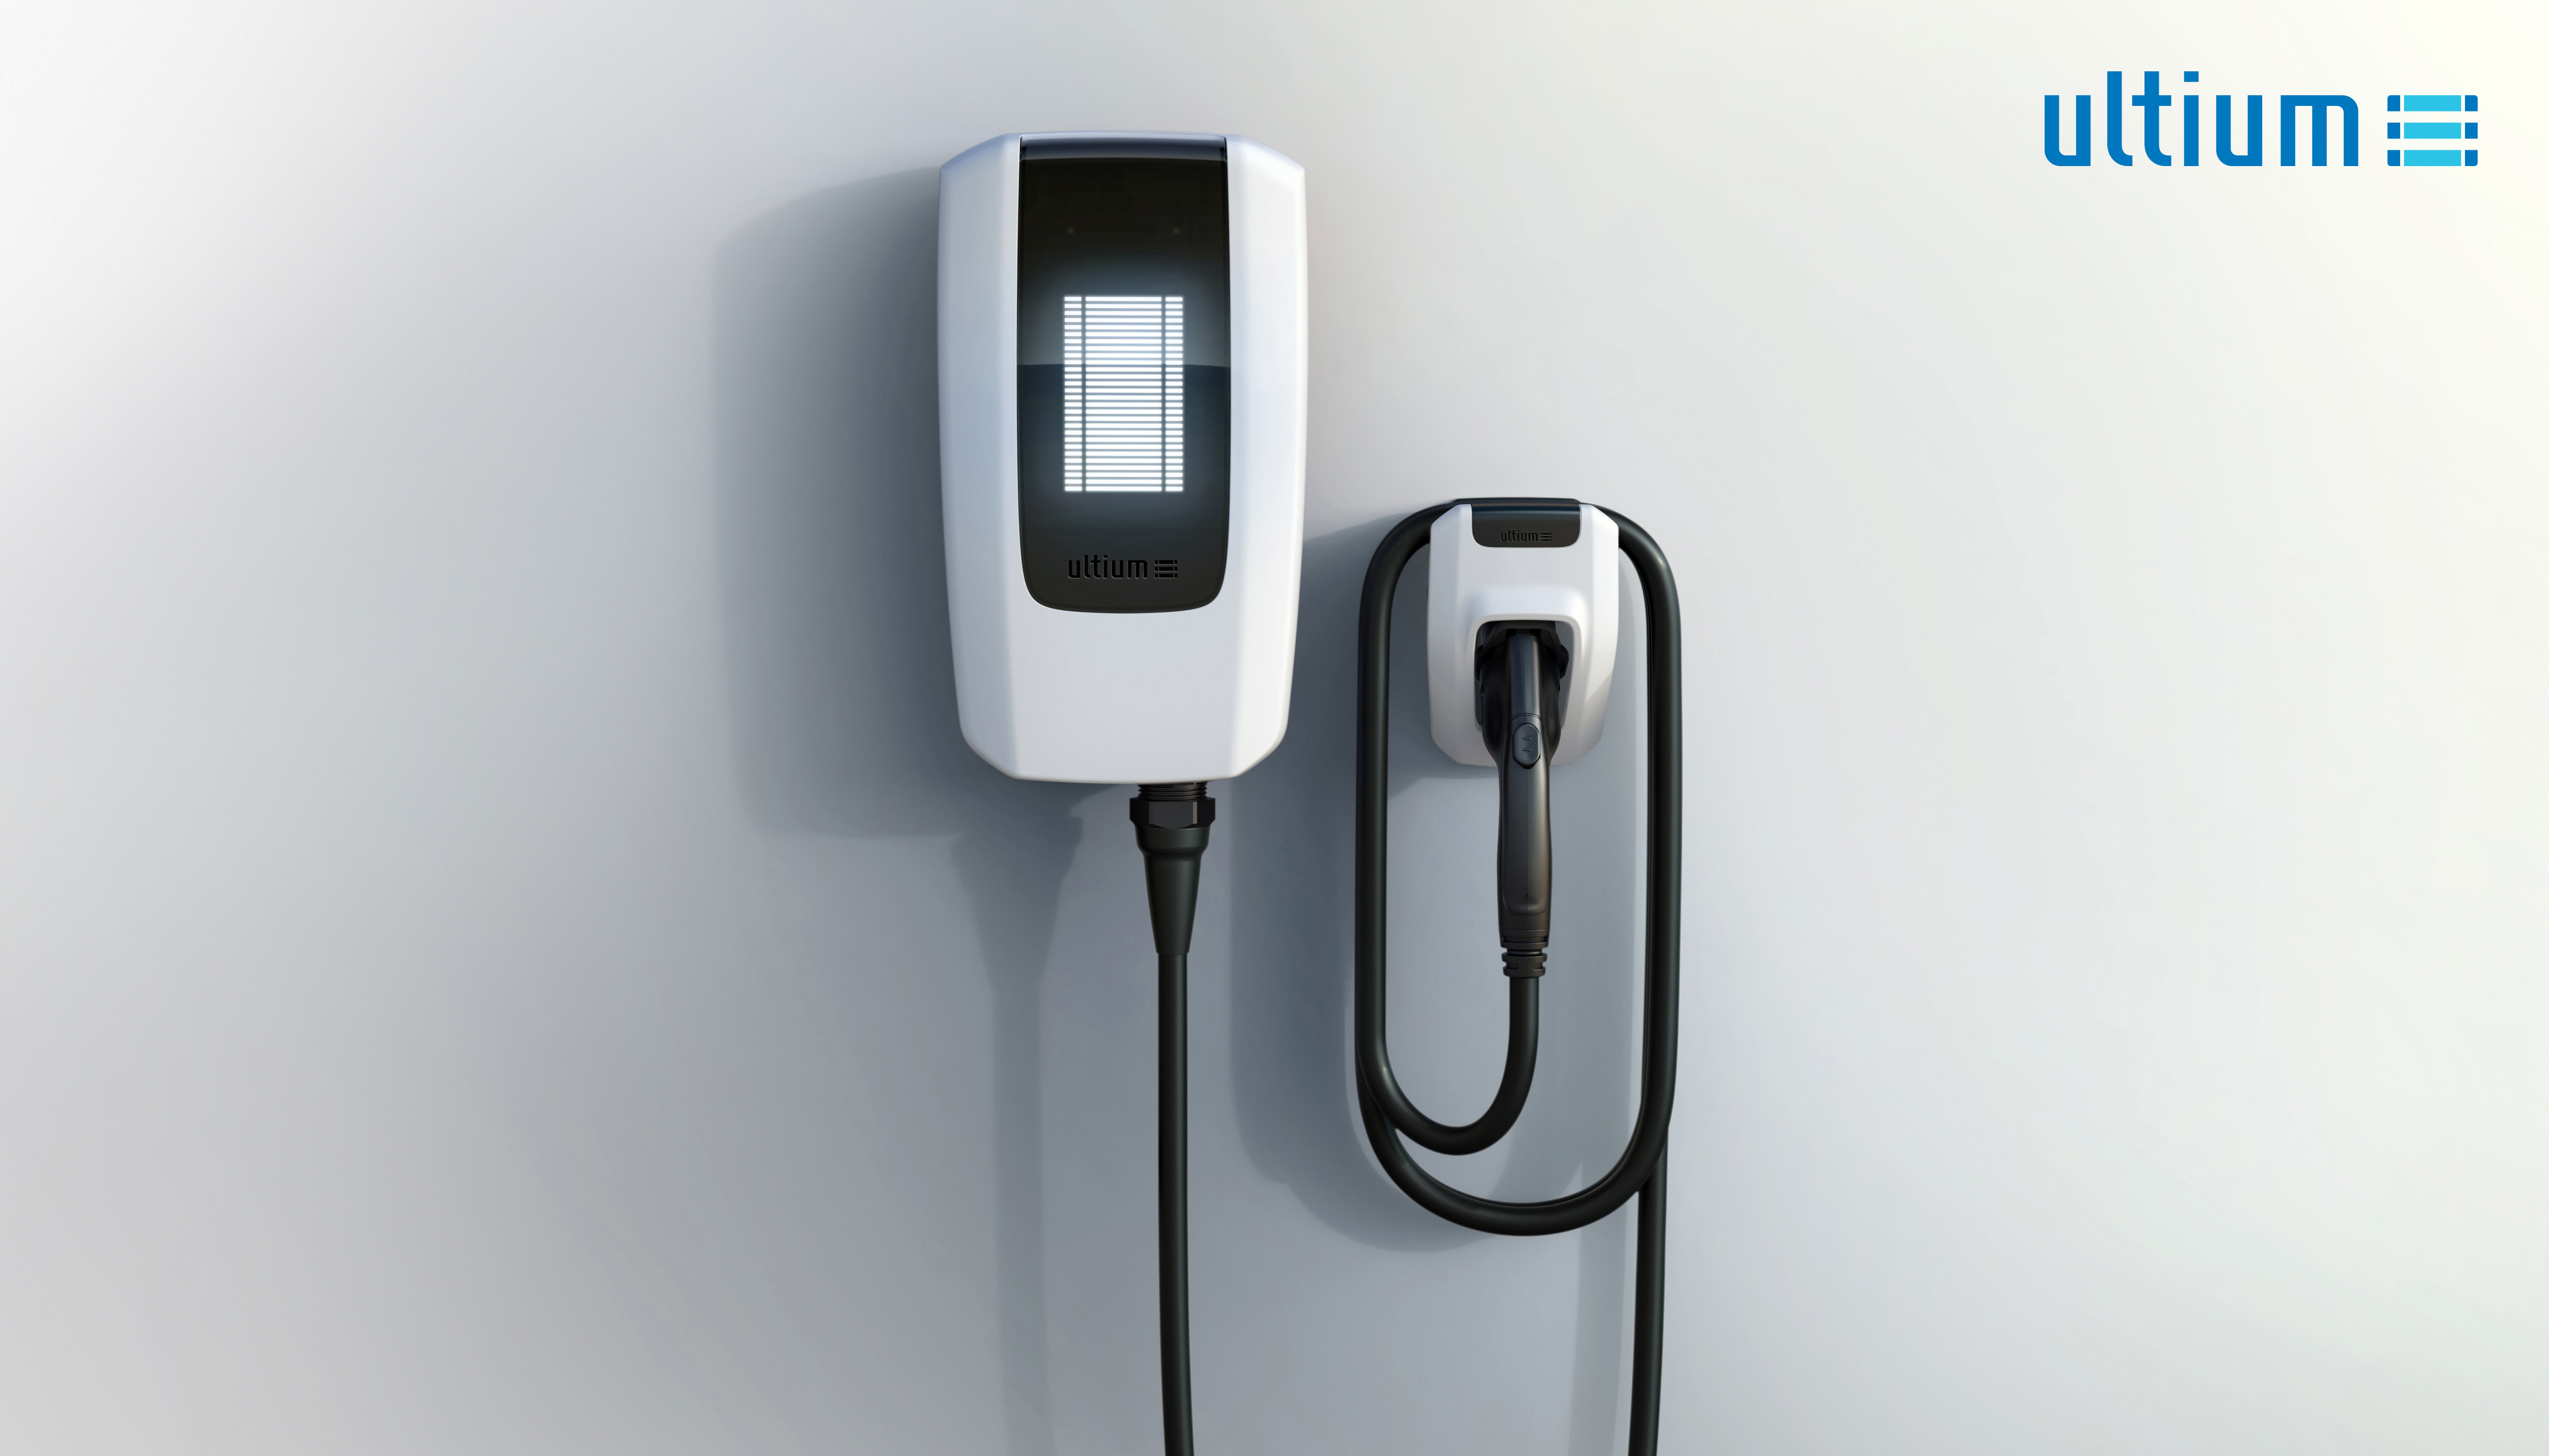 GM Announces New Initiative to Install 40,000 EV Chargers